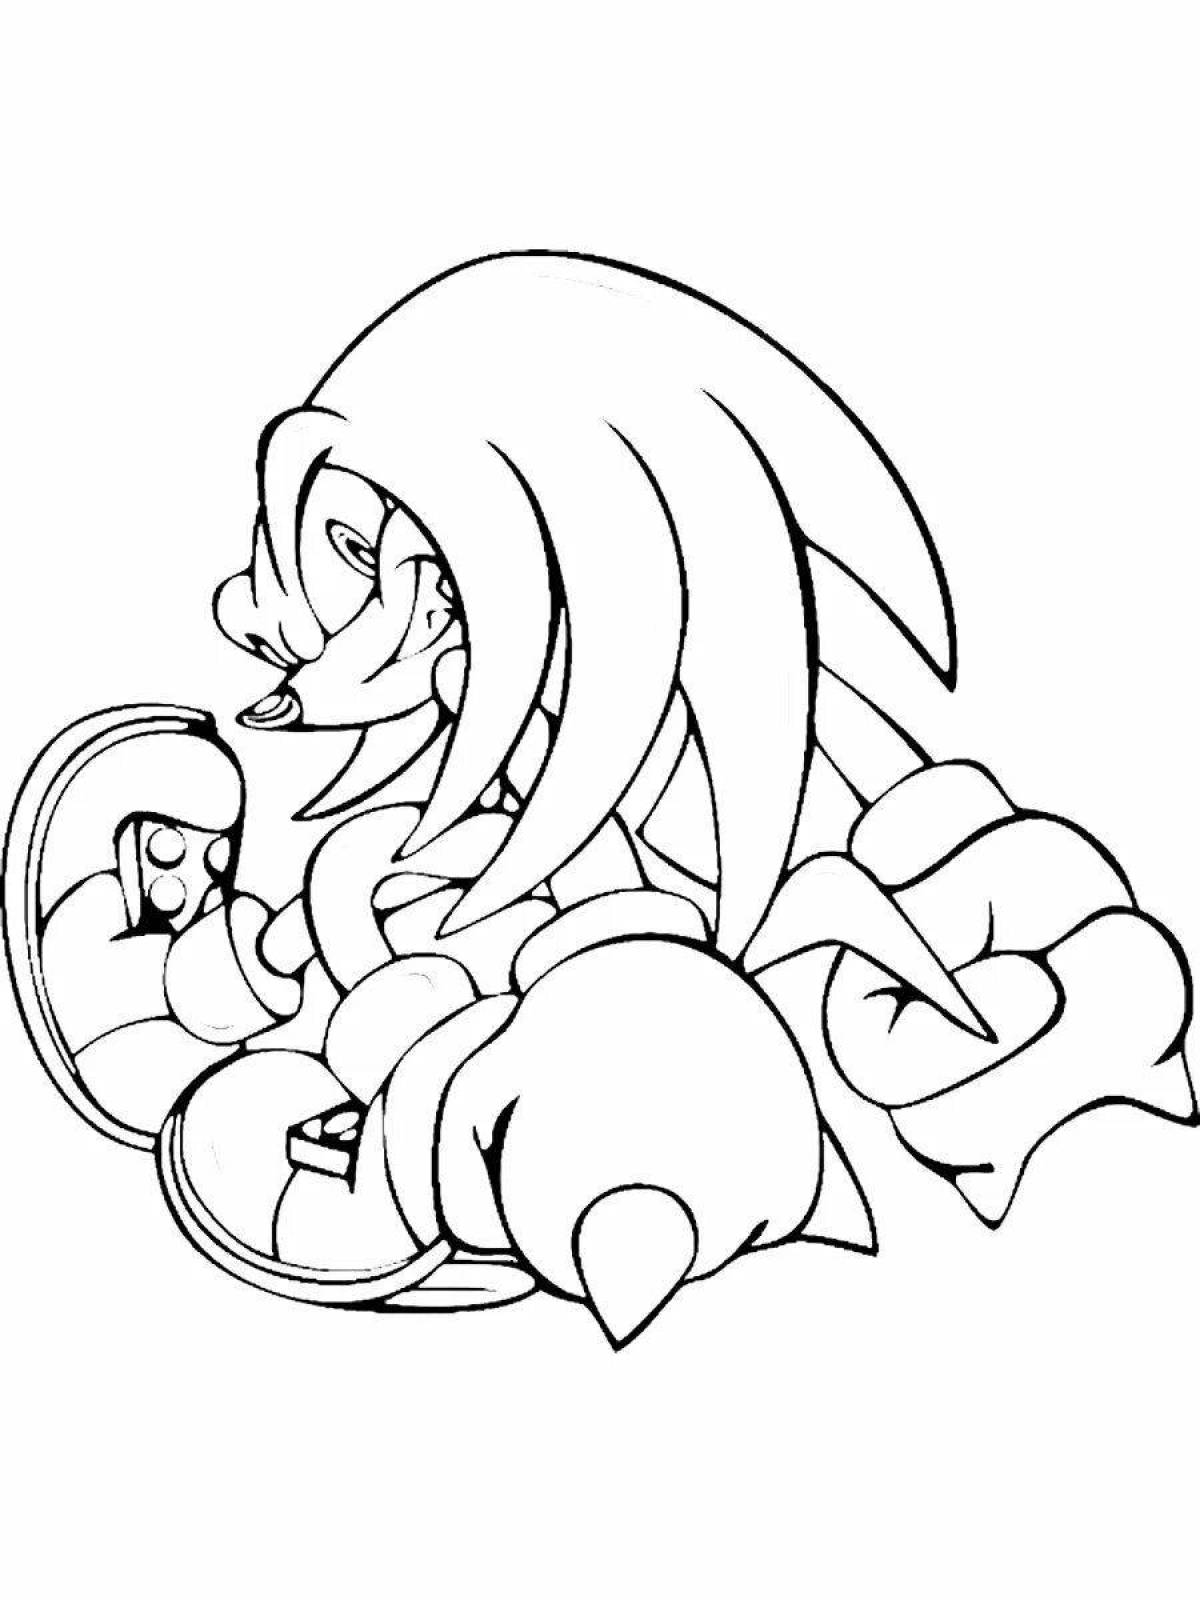 Coloring book happy echidna knuckles